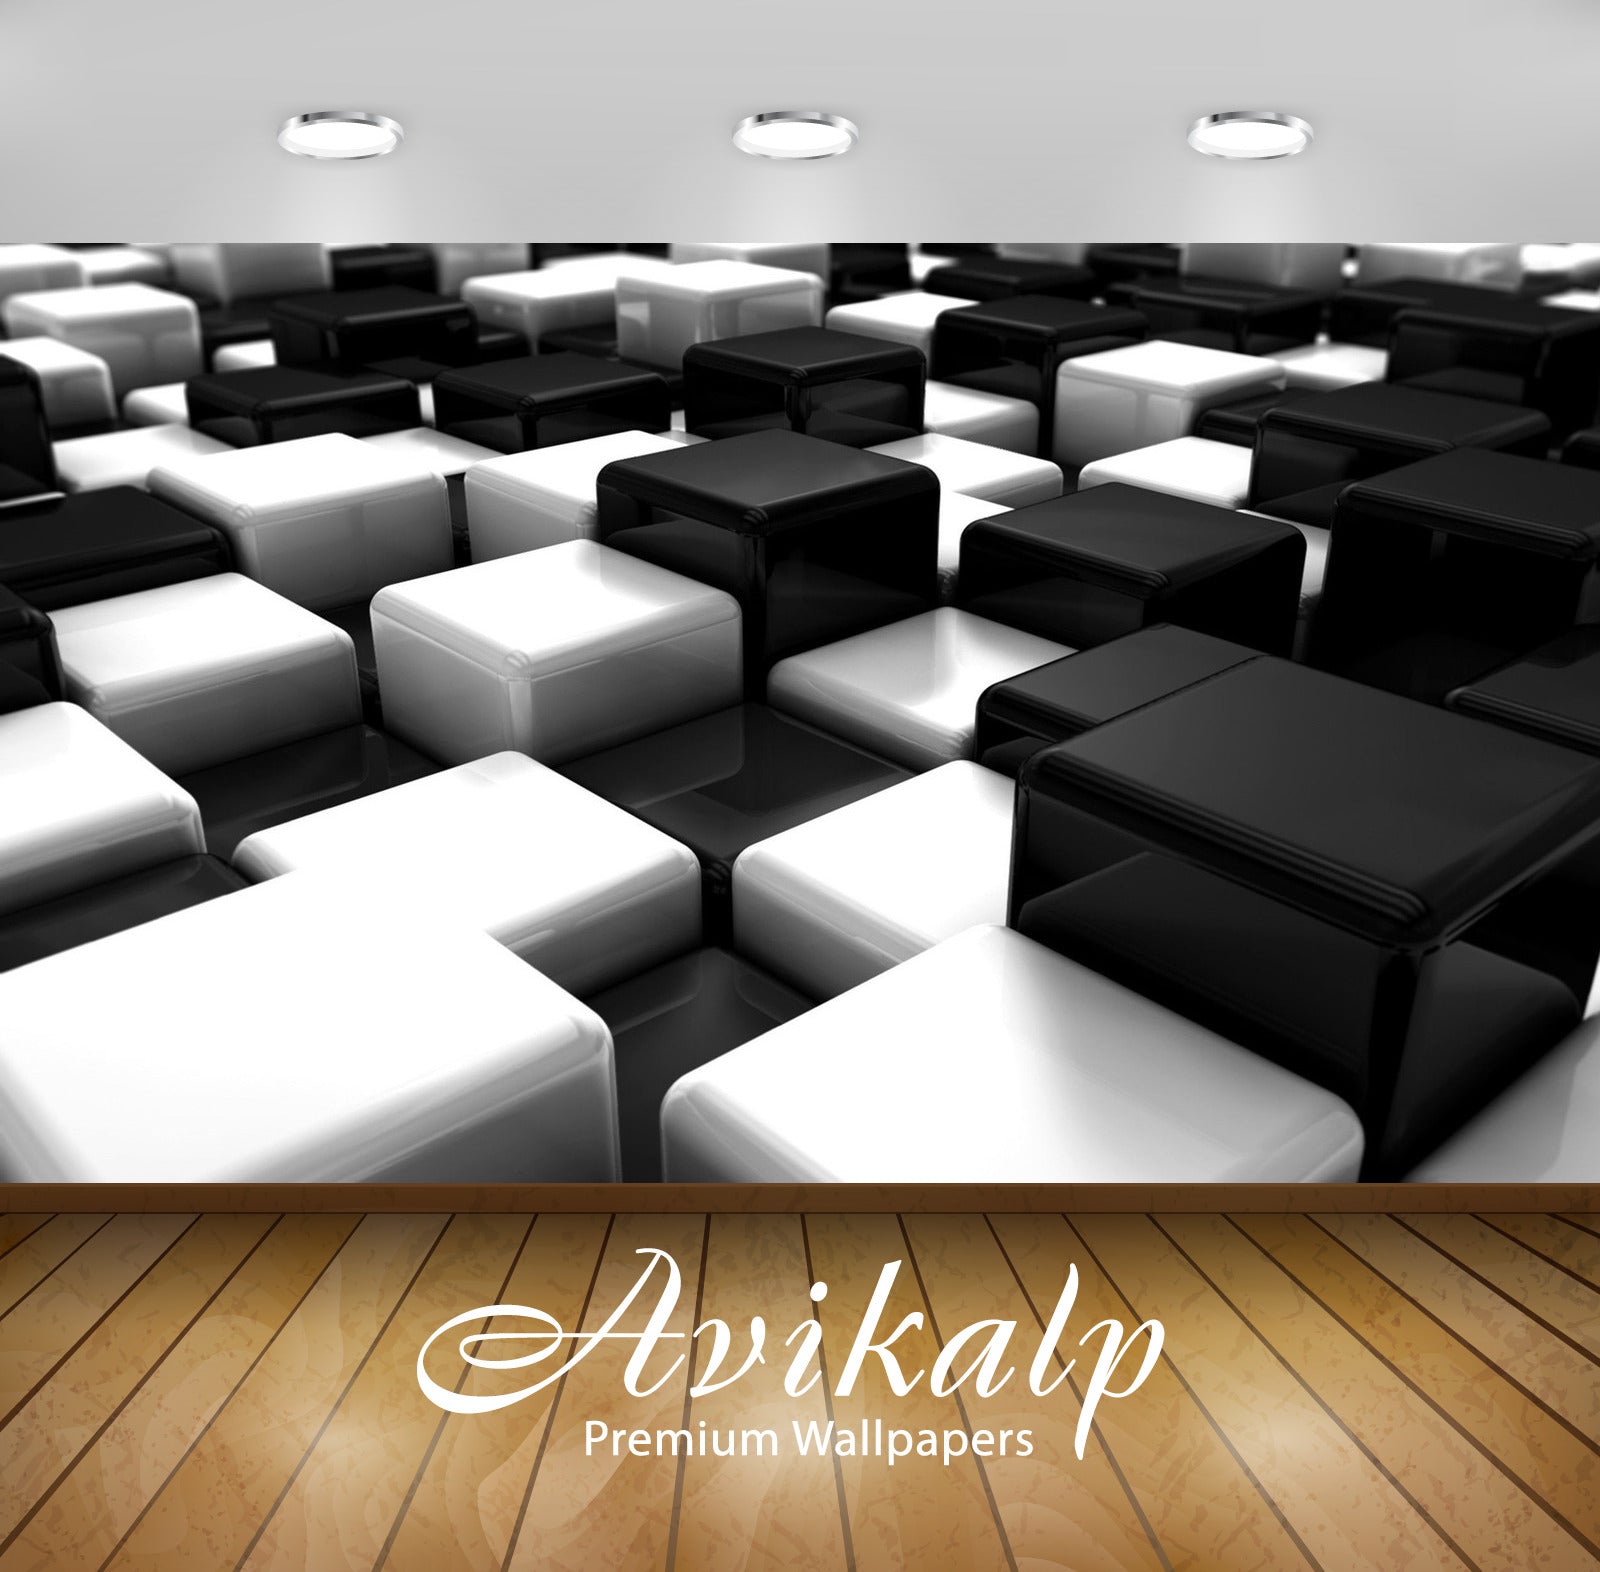 Avikalp Exclusive Blocks AWI1057 HD Wallpapers for Living room, Hall, Kids Room, Kitchen, TV Backgro